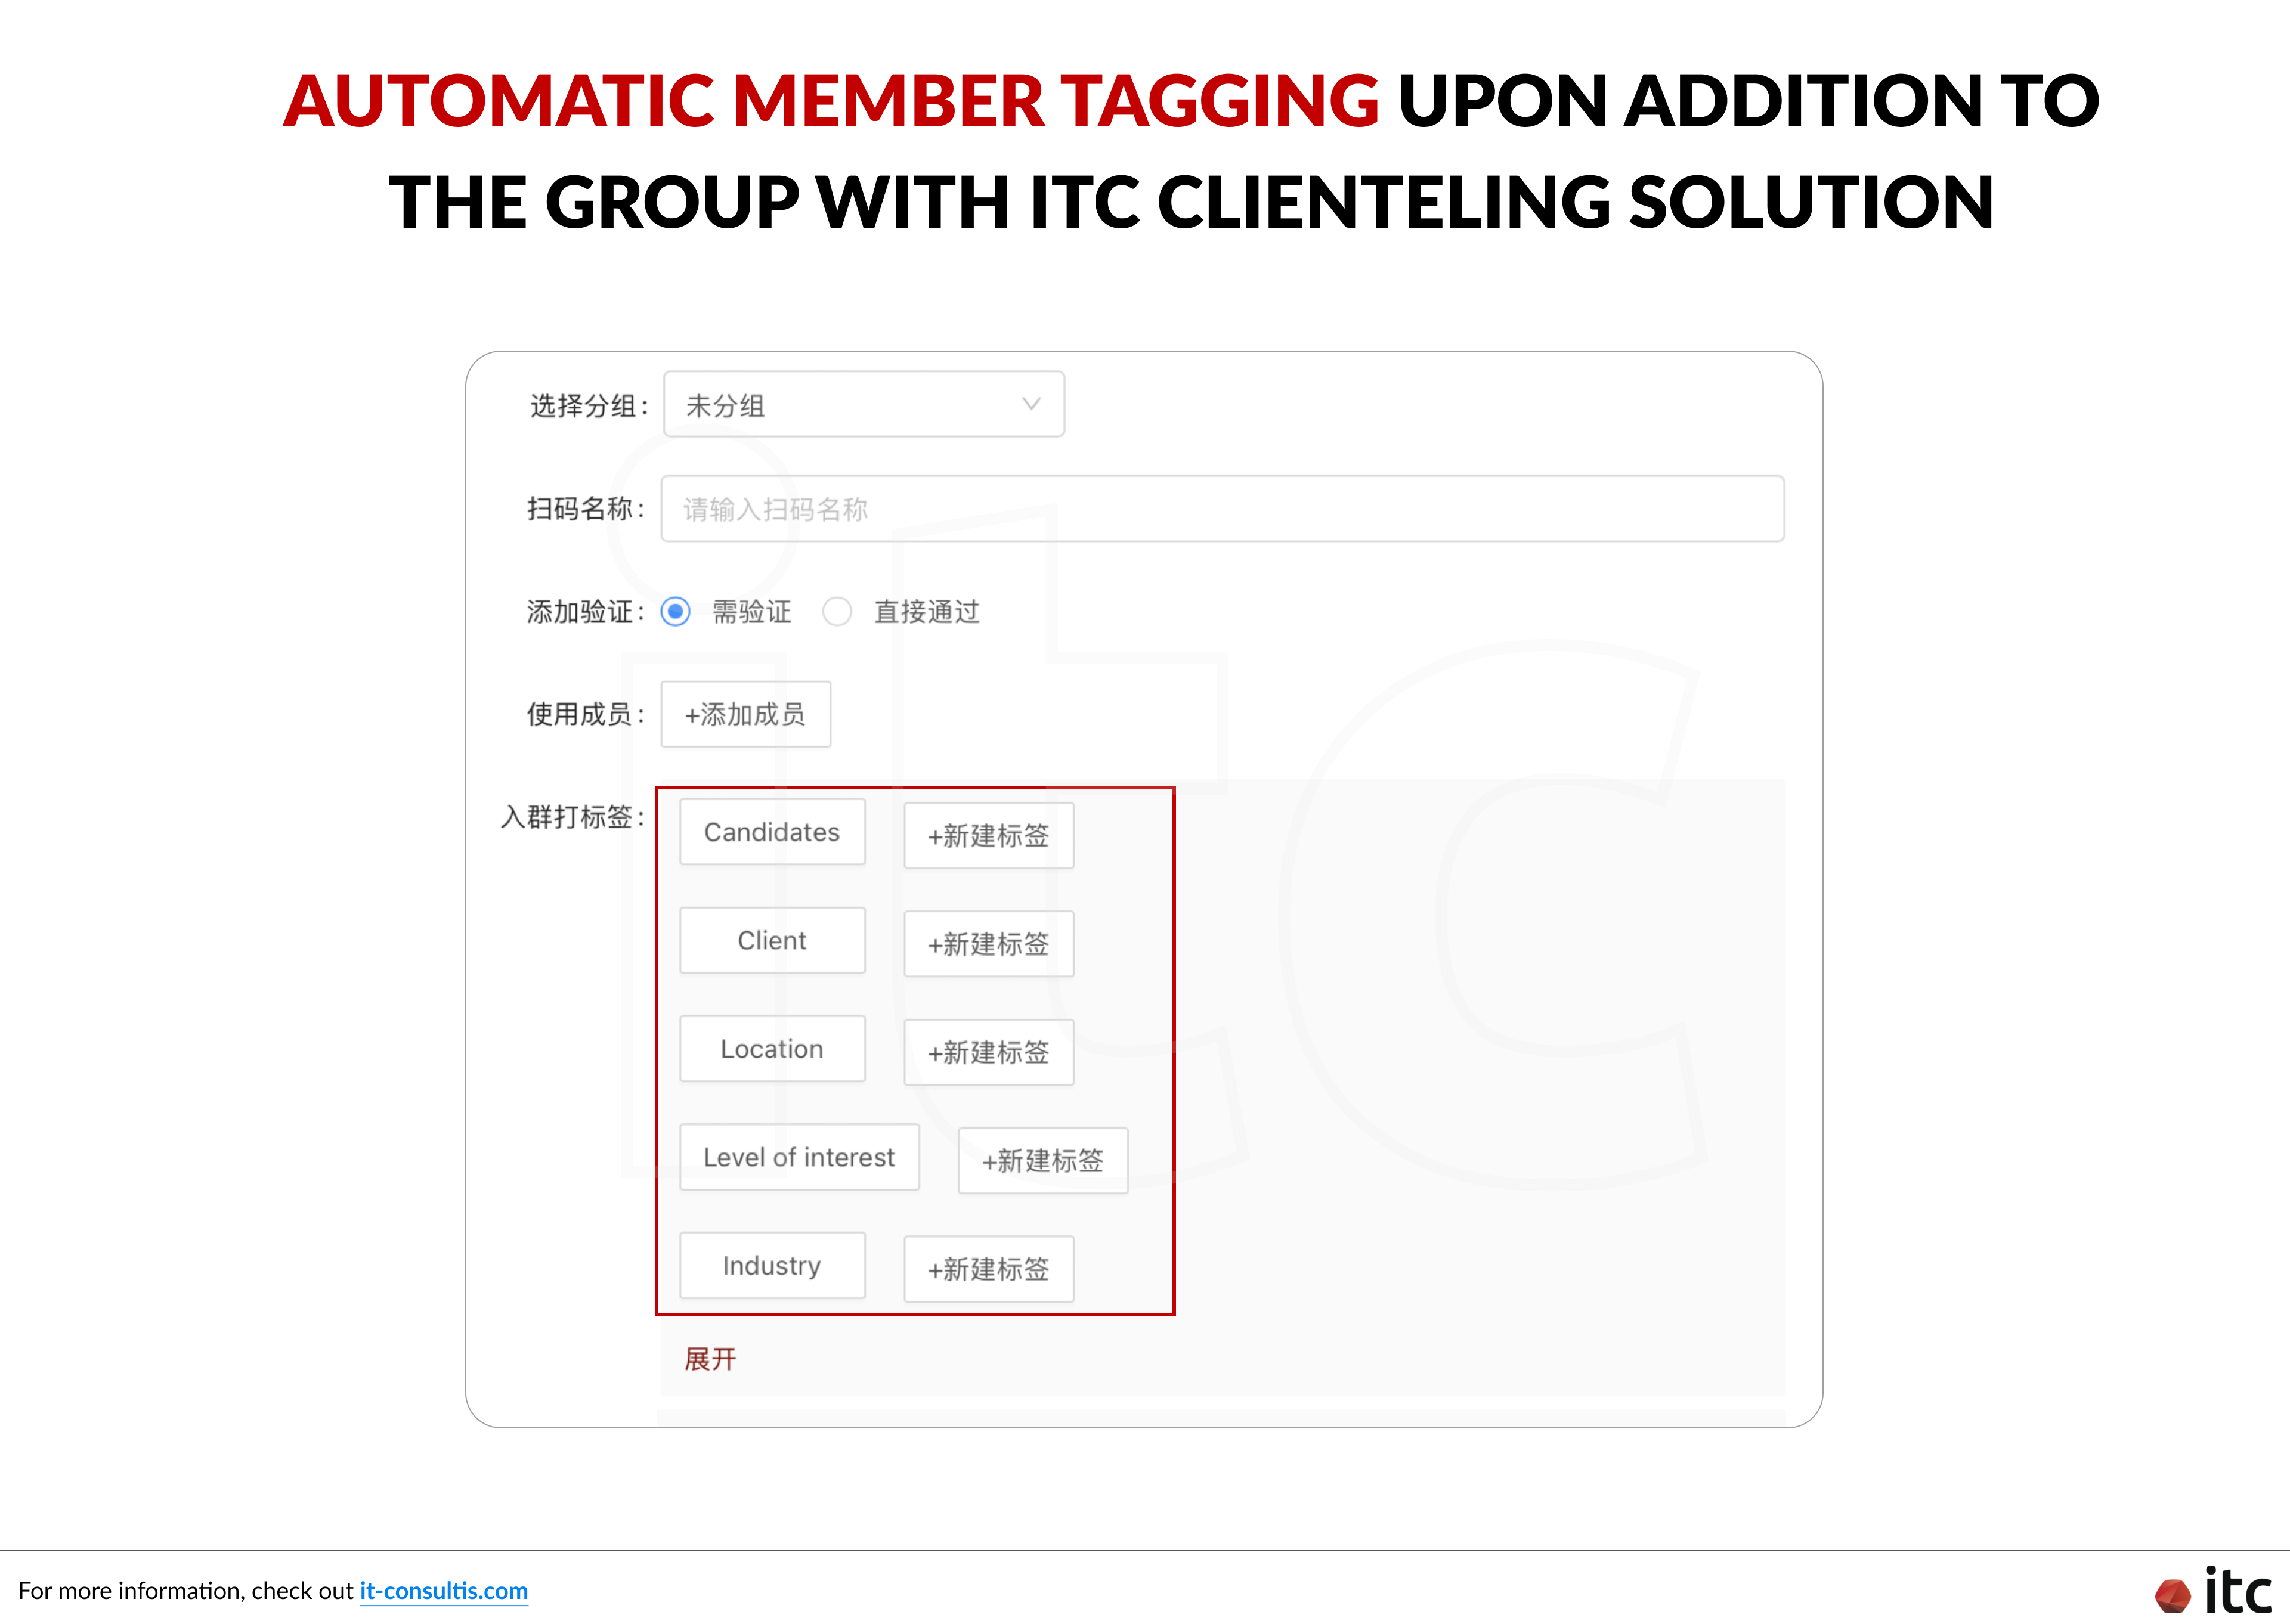 Automatic member tagging upon addition to the WeCom group with ITC Clienteling Solution